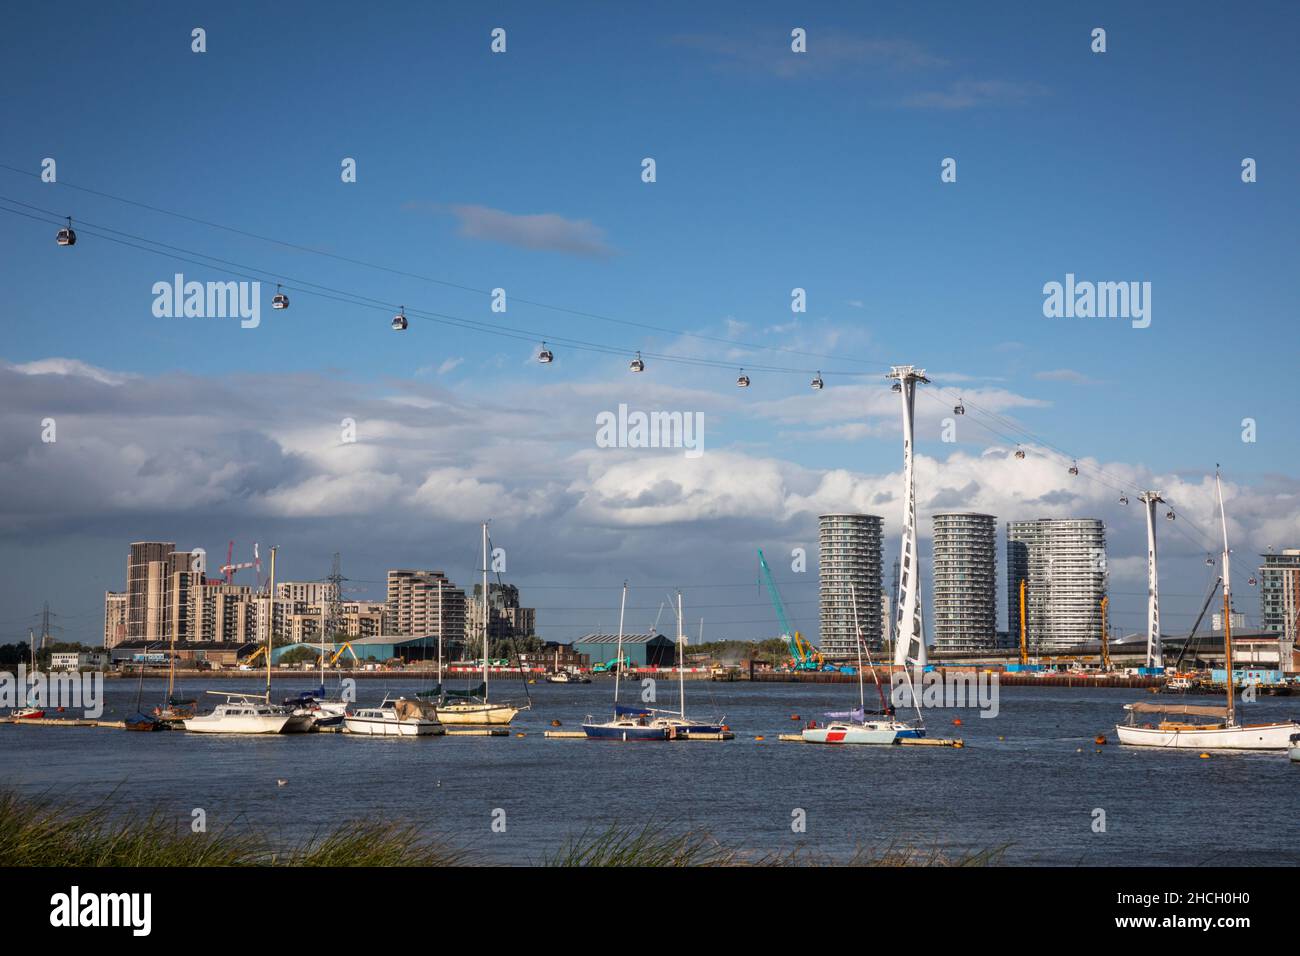 The Emirates Air Line cable car stretches across the Thames against a backdrop of new apartment blocks in East London, England, UK Stock Photo